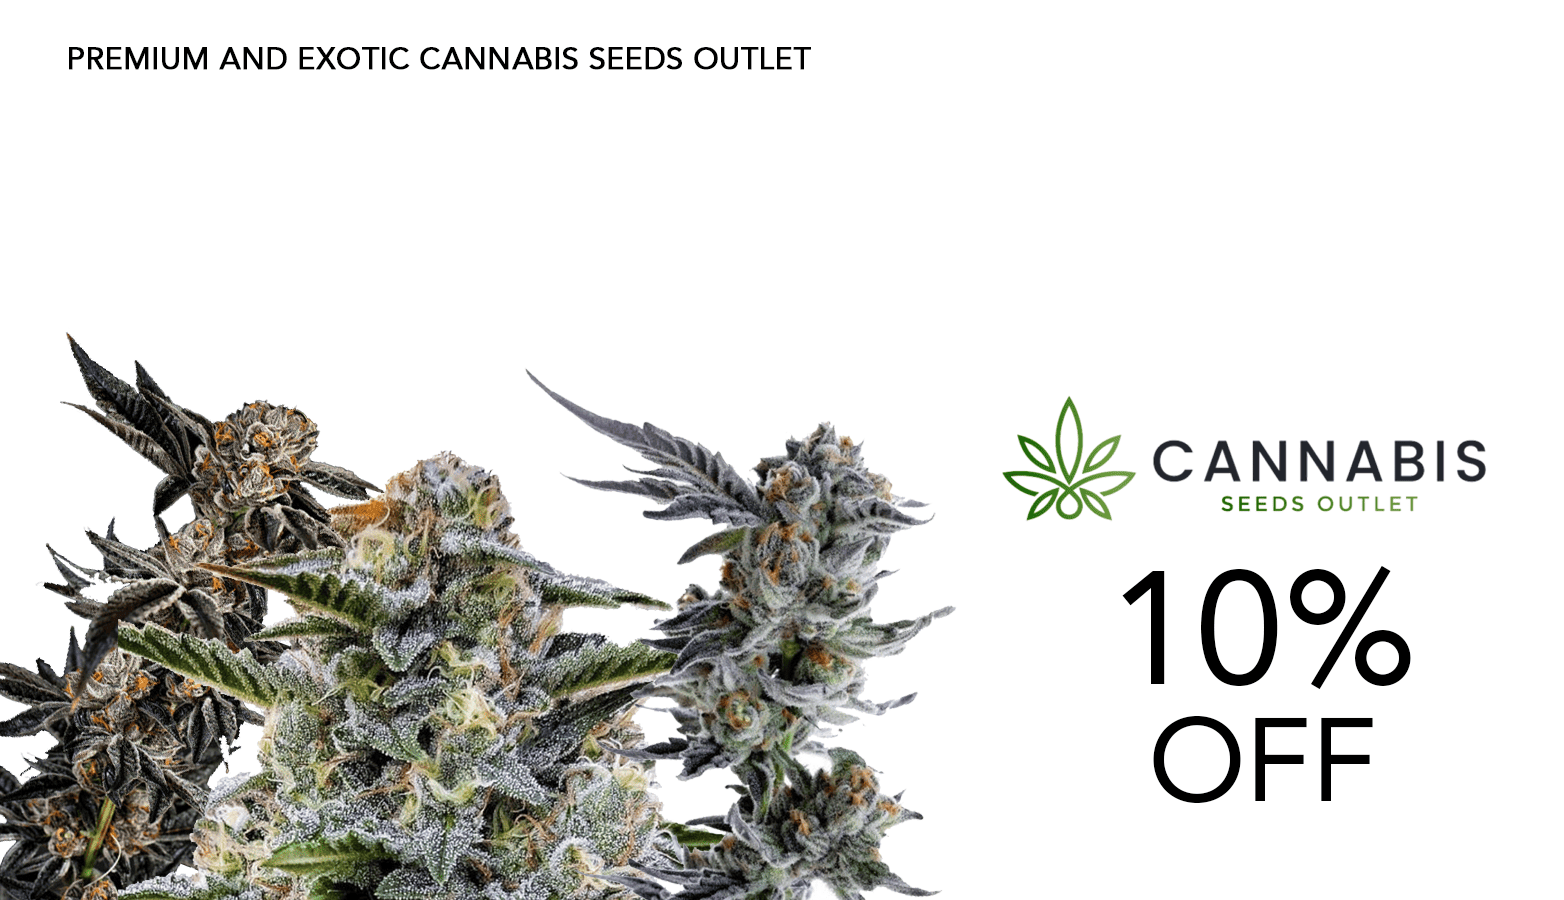 CAnnabis Seeds Outlet Discount Code - Save ON Cannabis